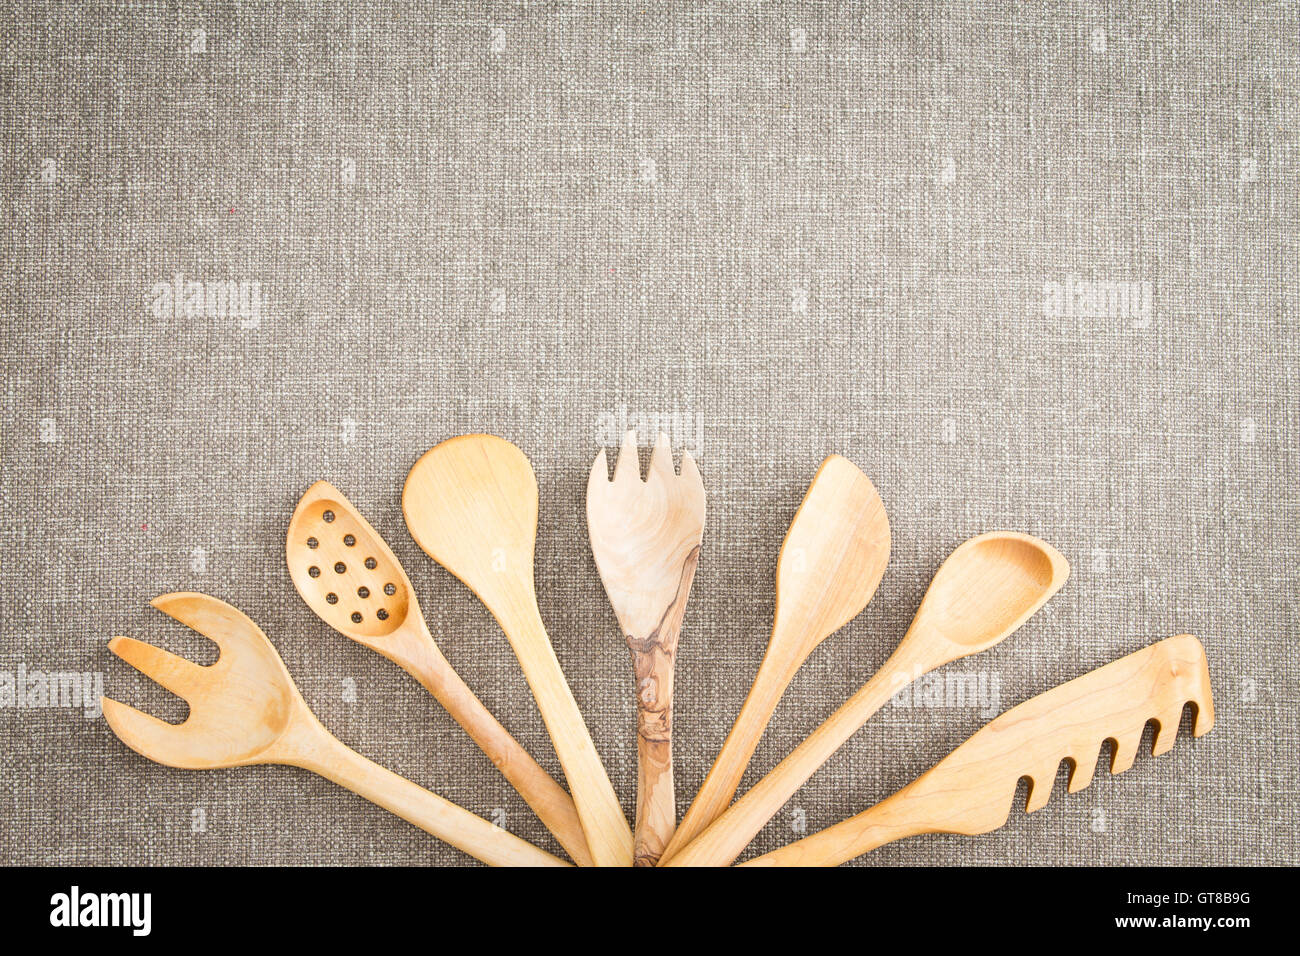 https://c8.alamy.com/comp/GT8B9G/fanned-display-of-a-variety-of-different-wooden-kitchen-utensils-arranged-GT8B9G.jpg